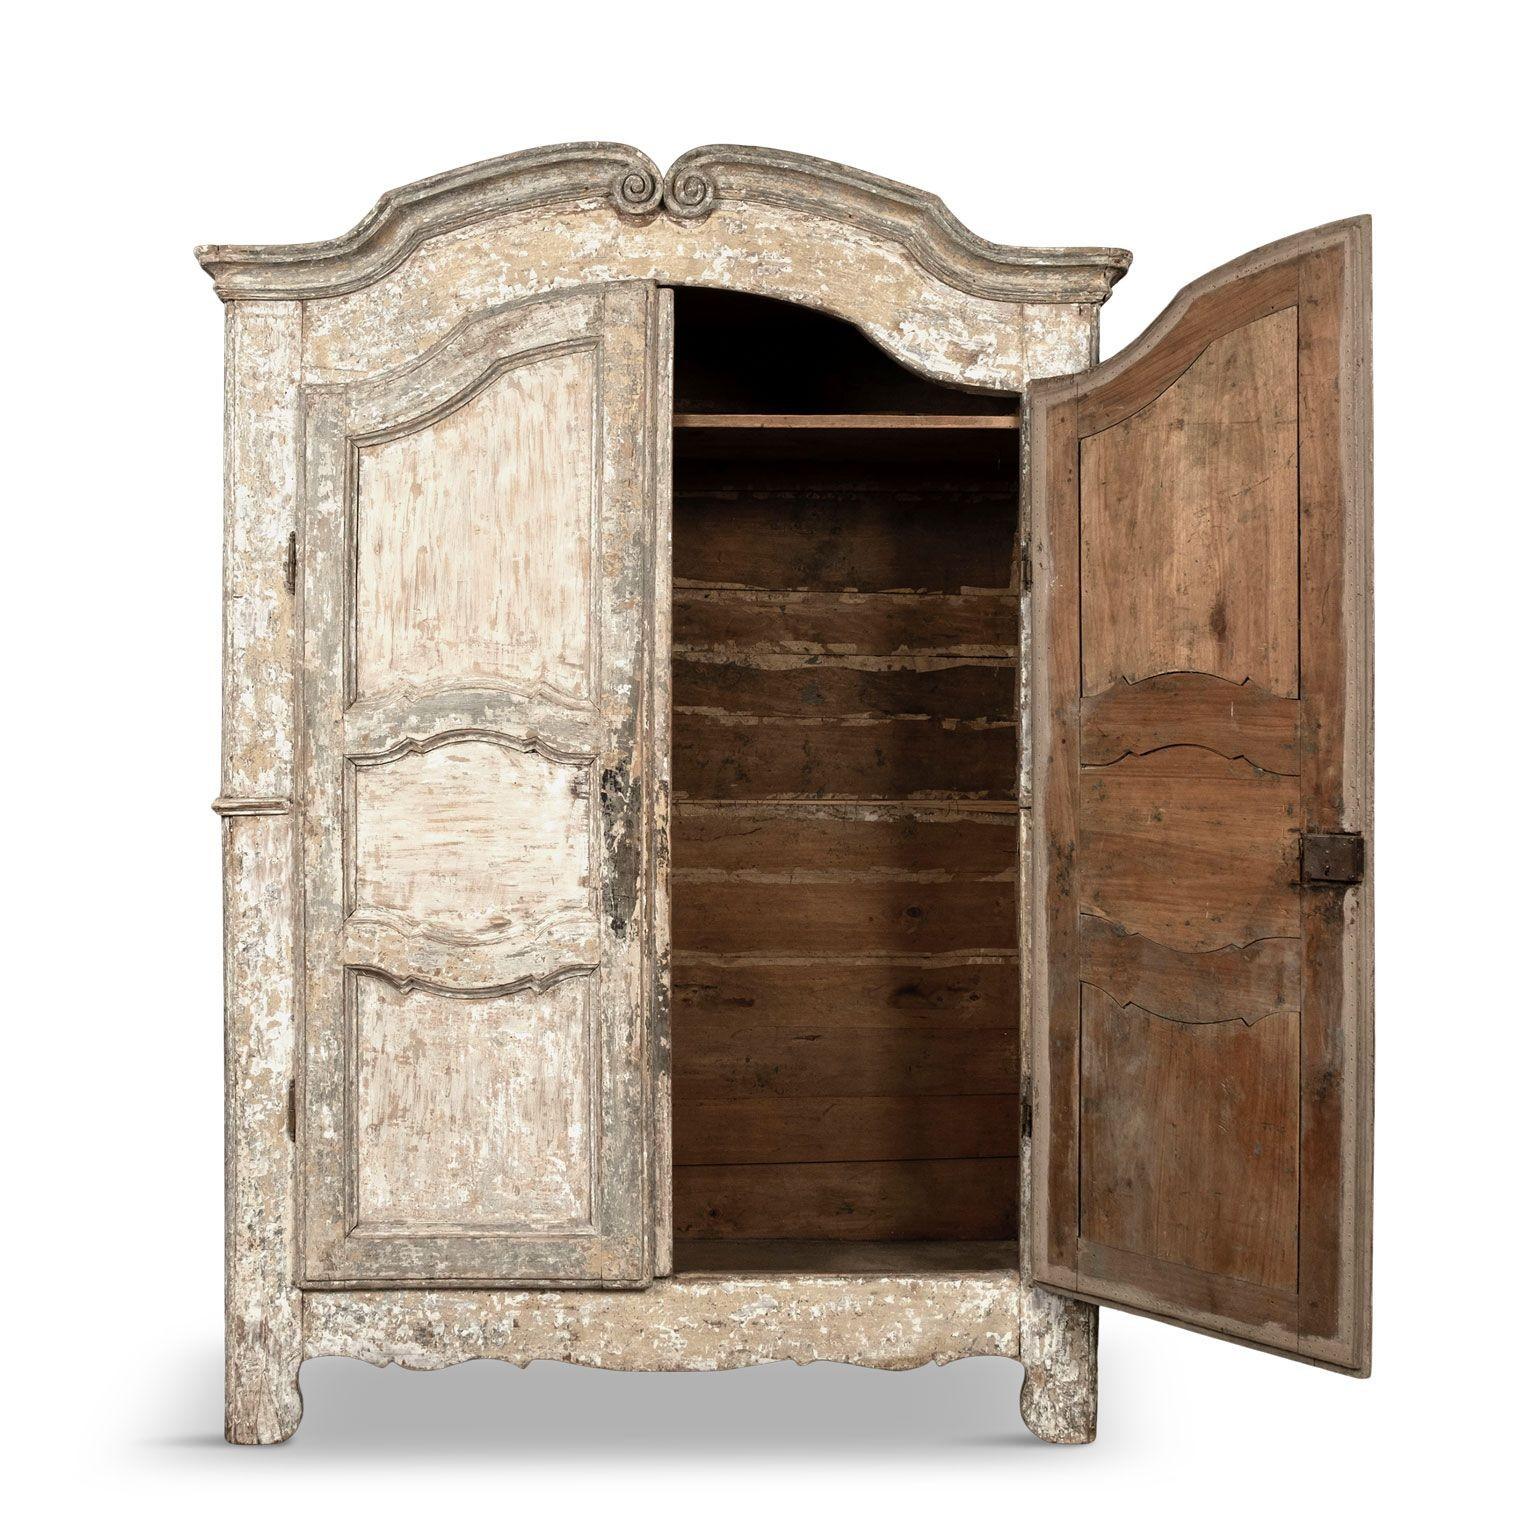 White painted French rococo wardrobe dating to circa 1740-1769. Mostly likely from Northern France. Excellent hand-carved details. Scraped back painted finish in revealed layers of white, cream and light gray colors.